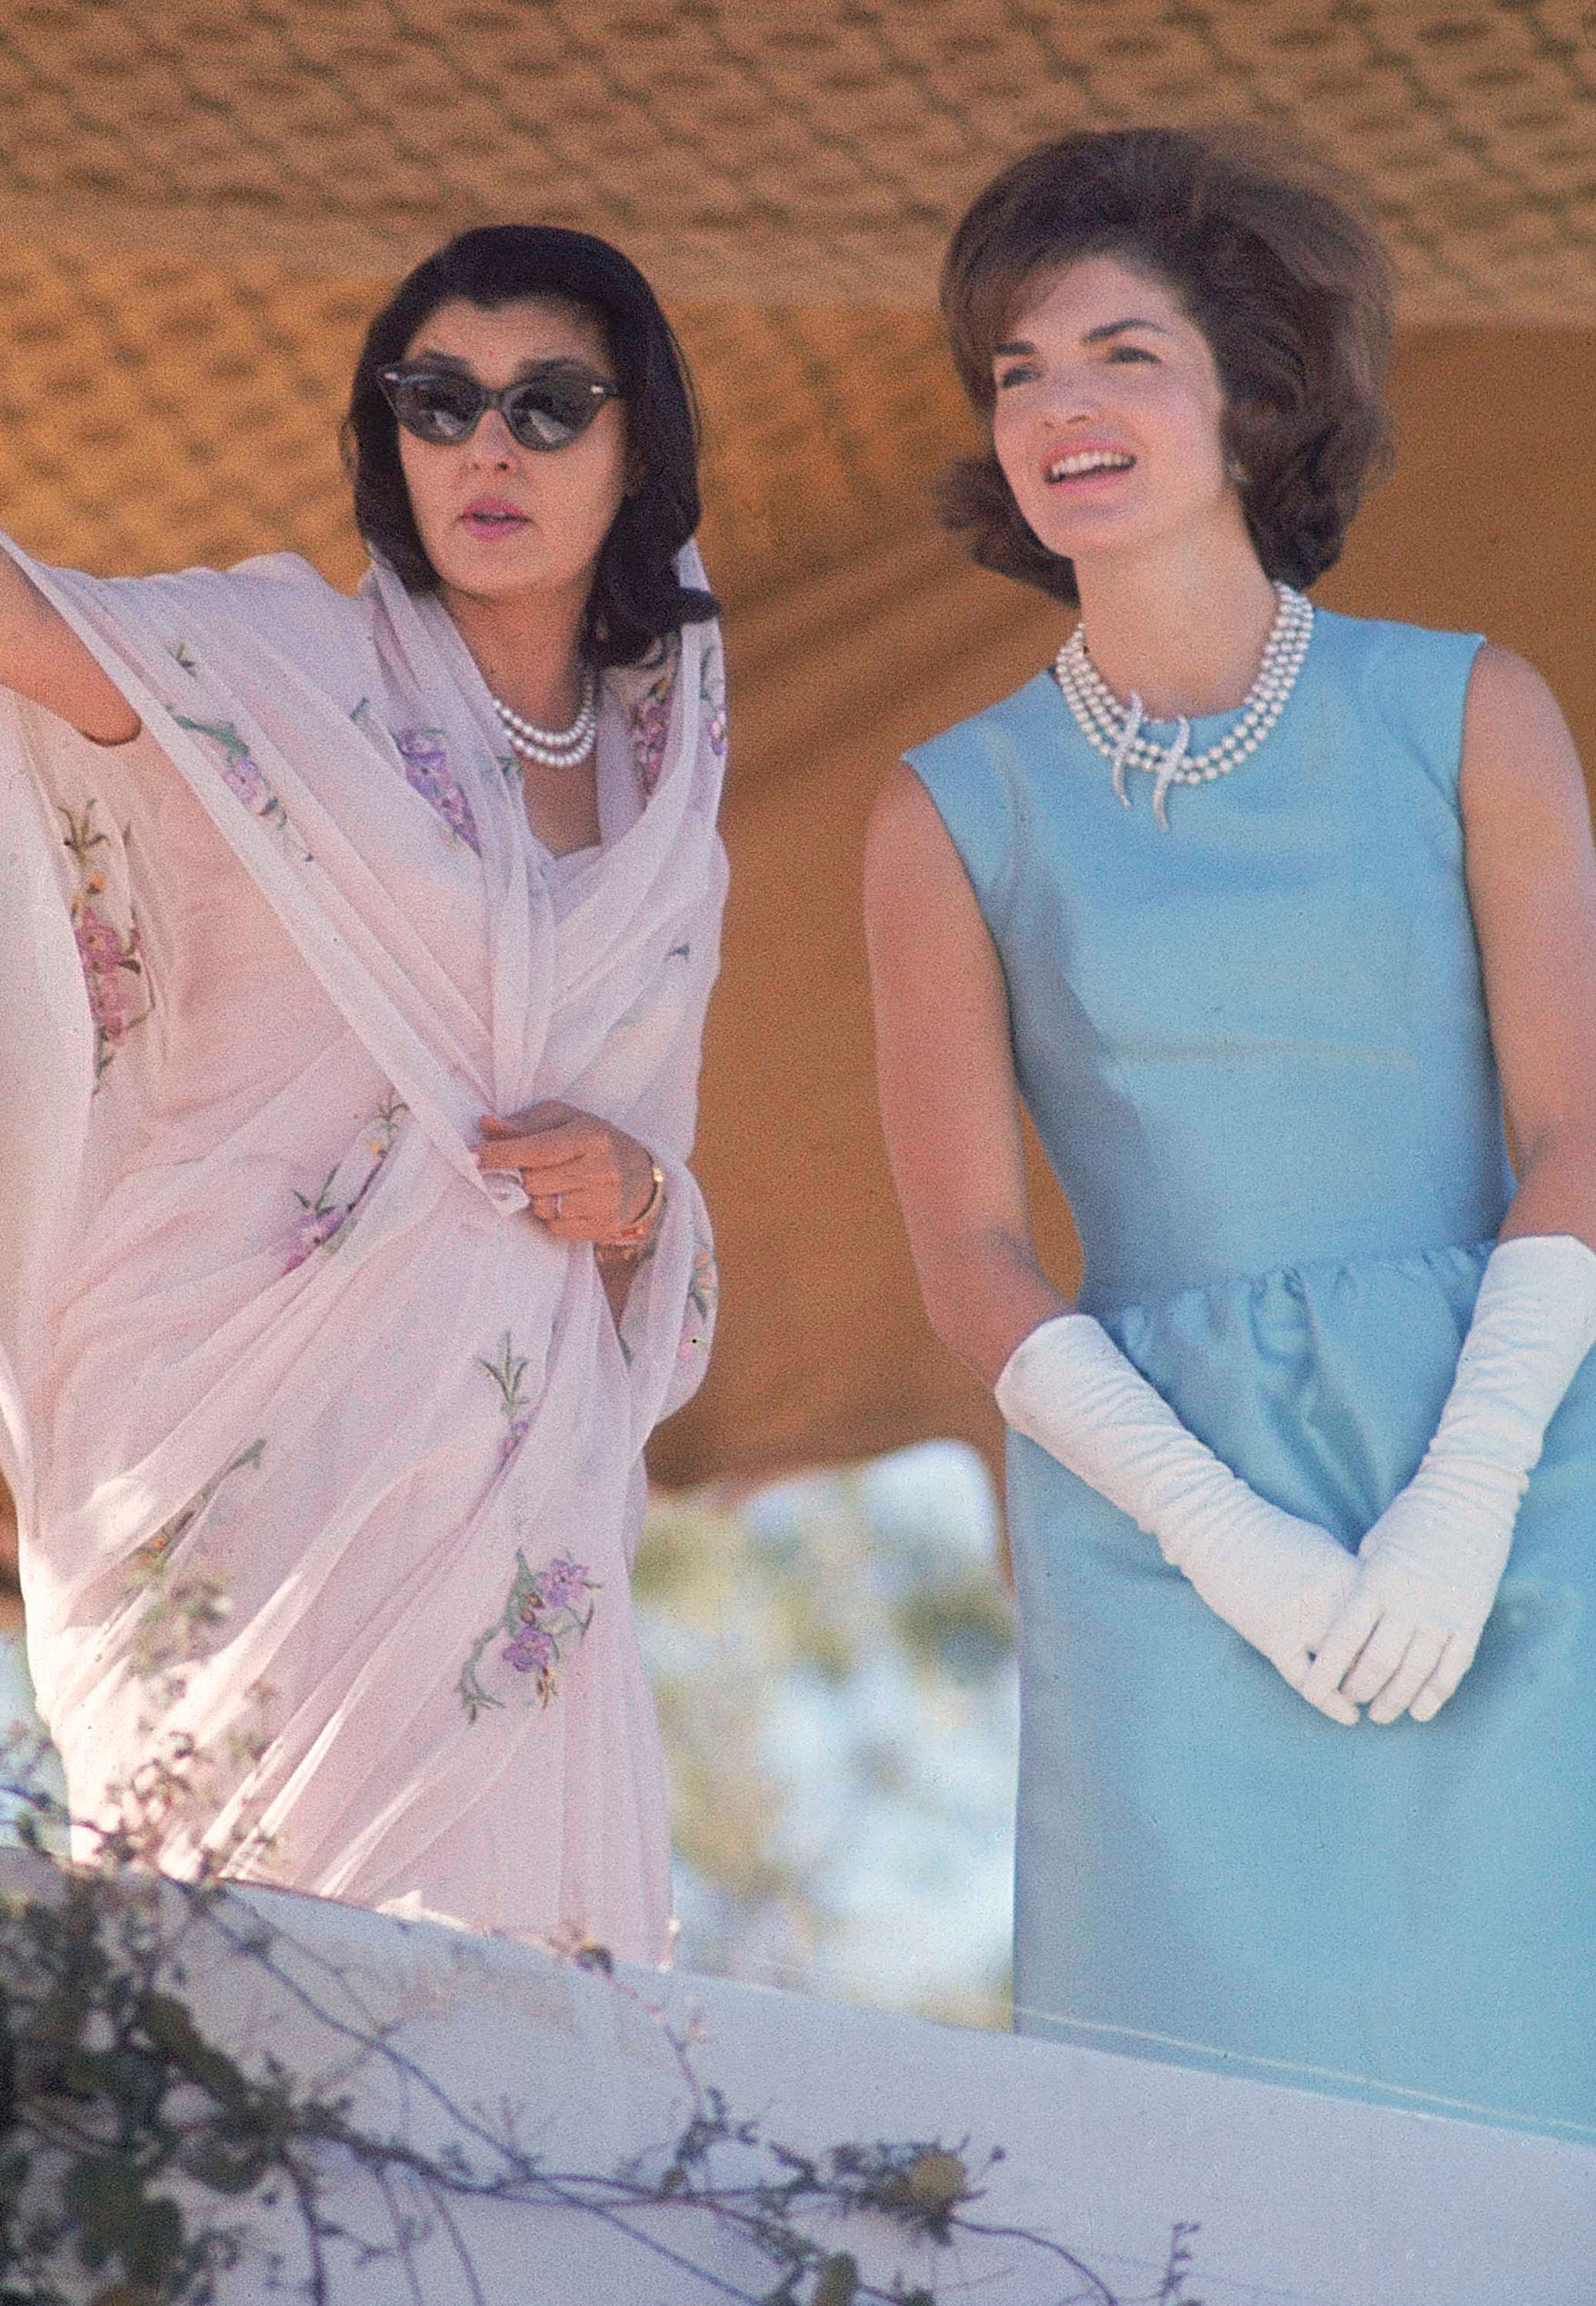 First Lady Jackie Kennedy, right, in blue sheath dress and white gloves watches a polo match with Maharani of Jaipur, Gayatri Devi, on a visit to India in March 1962.